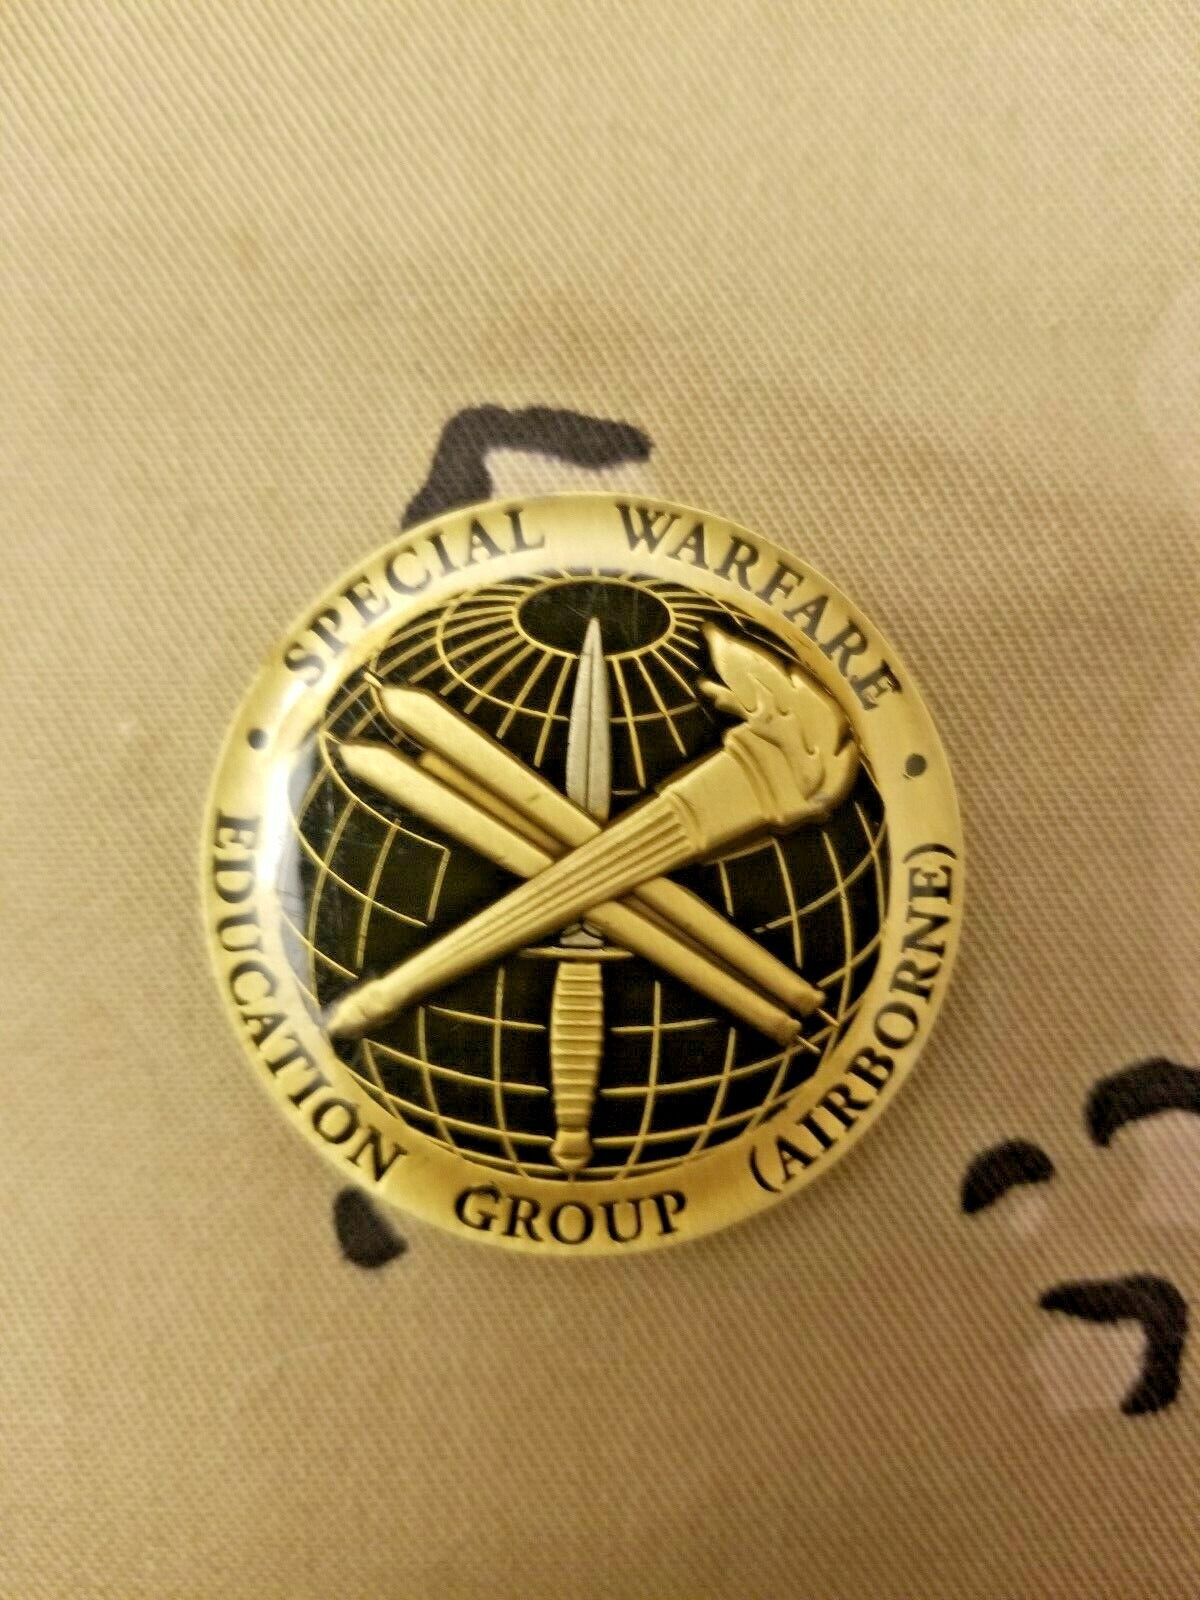 JFK SPECIAL WARFARE CENTER, LIFELONG LEARNER  SPECIAL FORCES CHALLENGE COIN